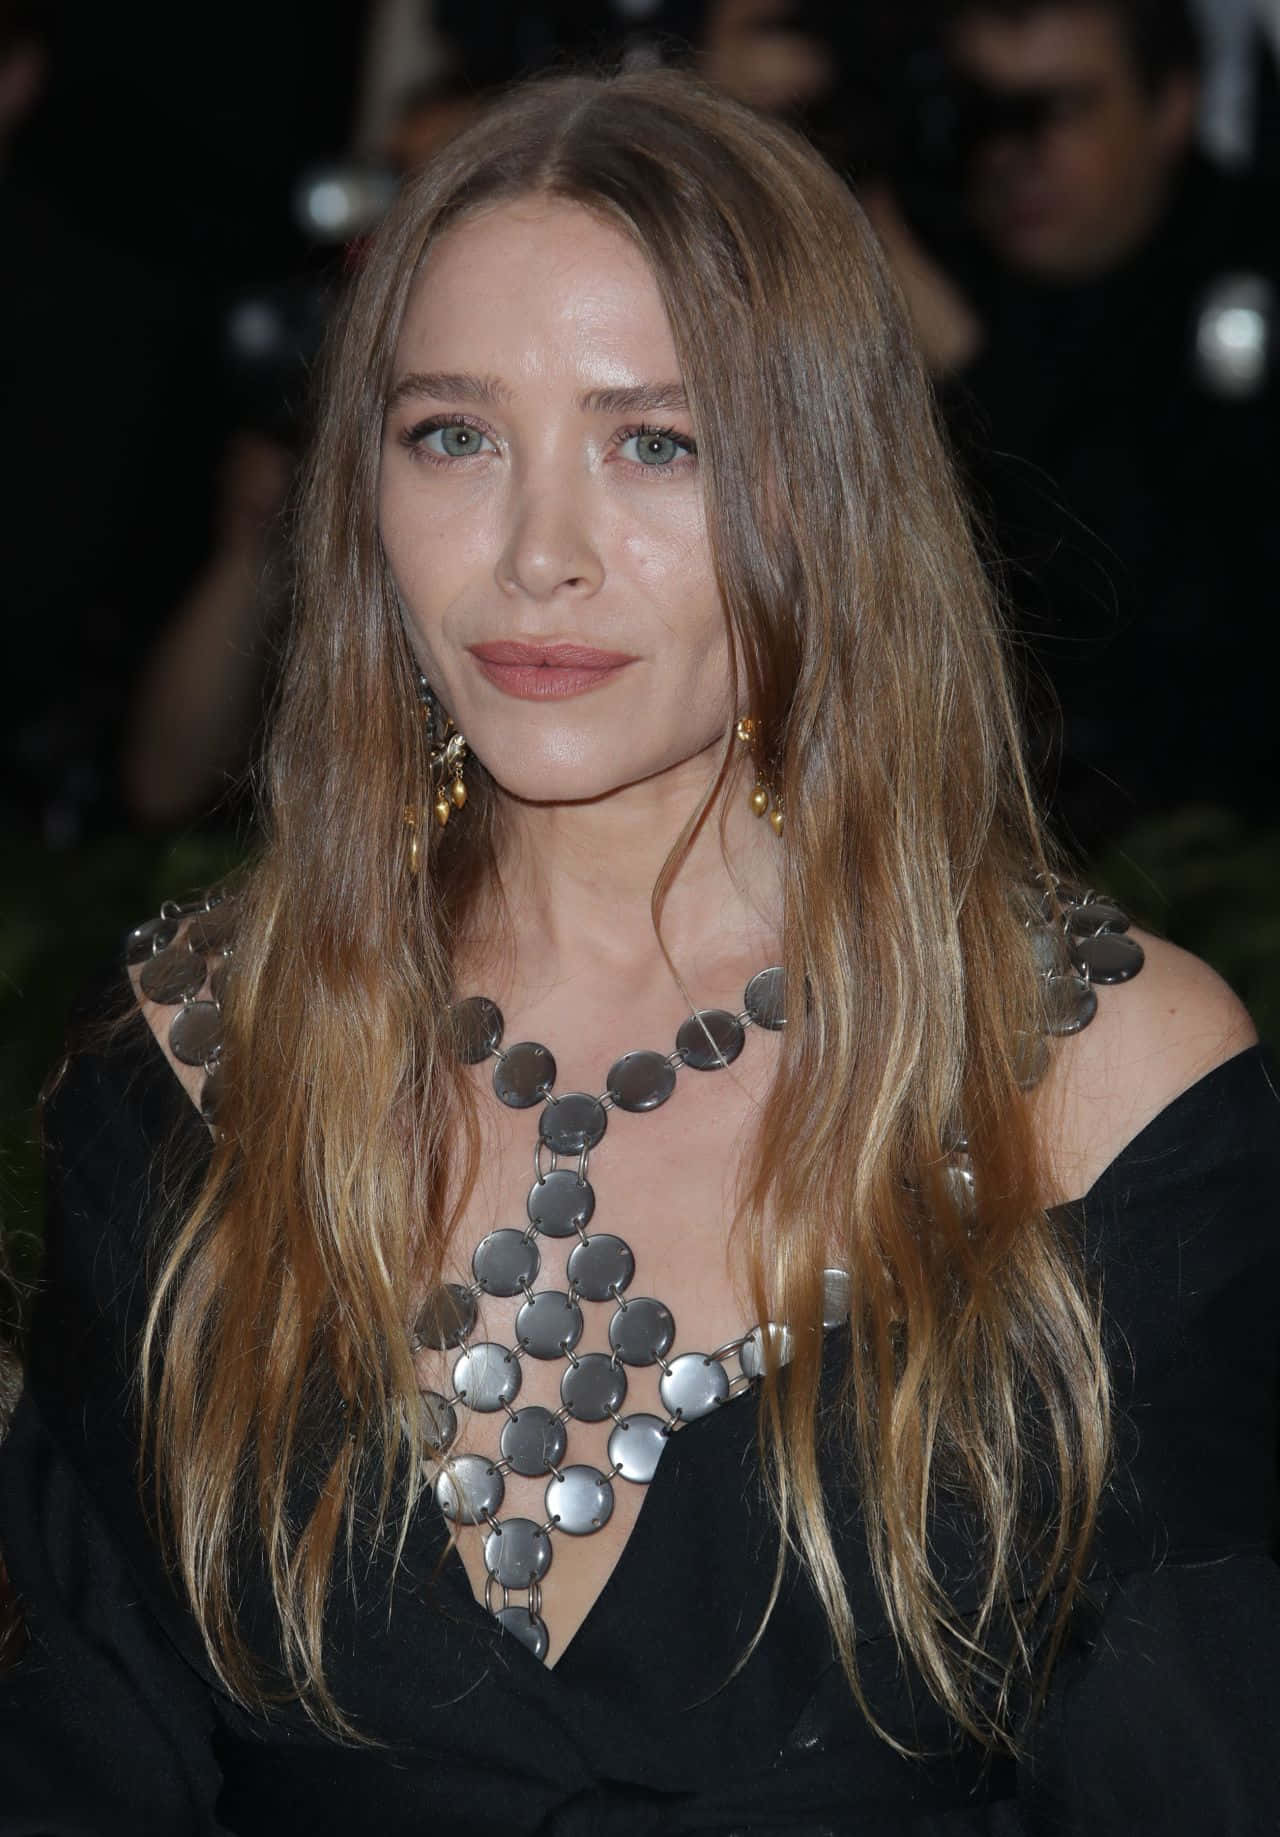 Mary-Kate Olsen at a Red Carpet Event Wallpaper